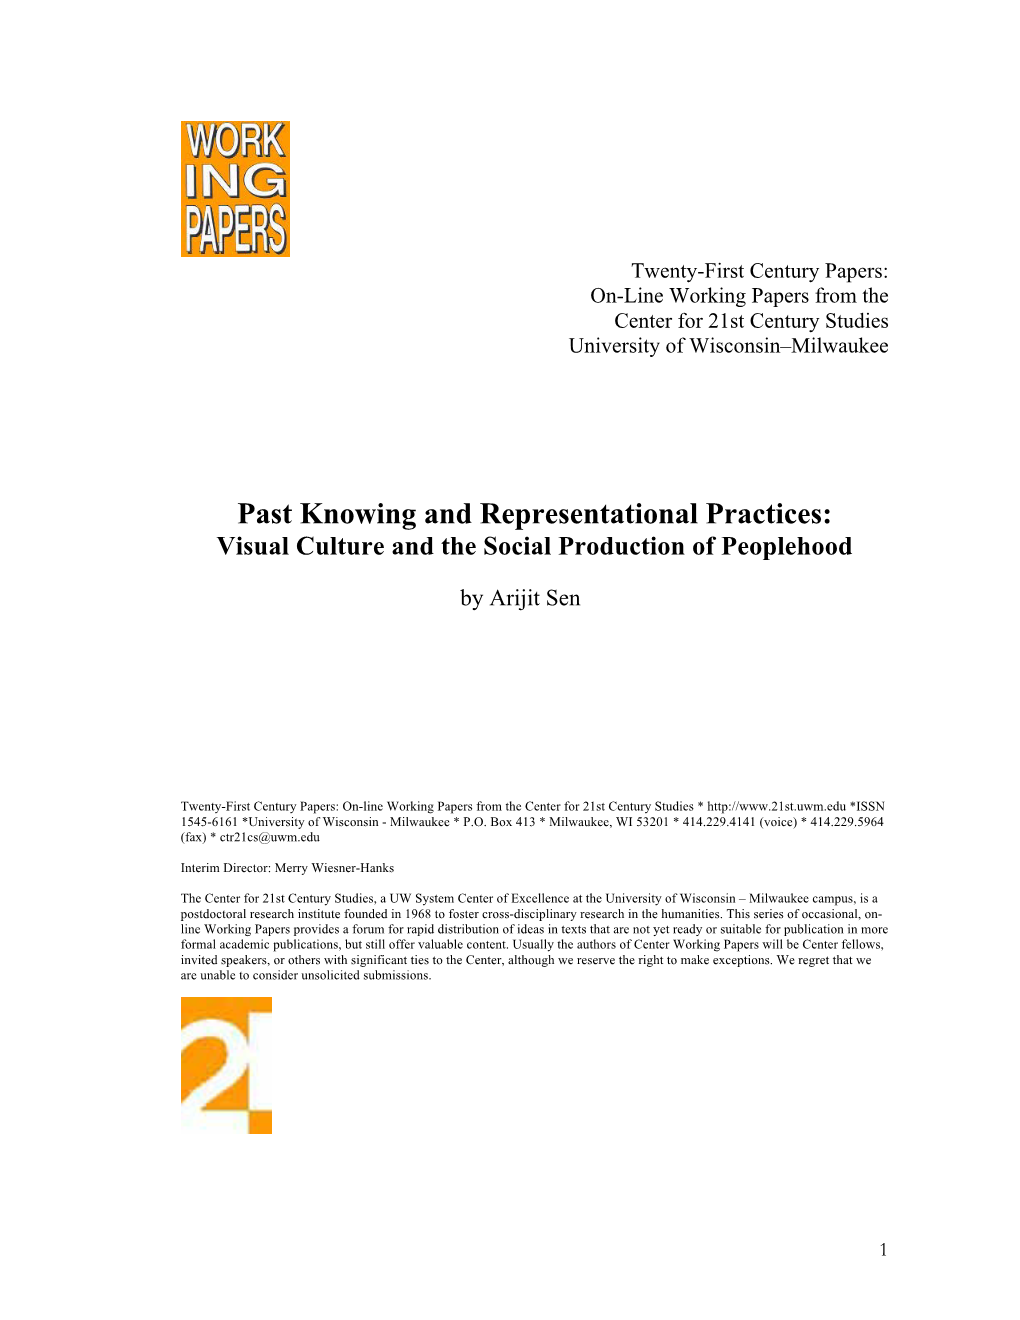 Past Knowing and Representational Practices: Visual Culture and the Social Production of Peoplehood